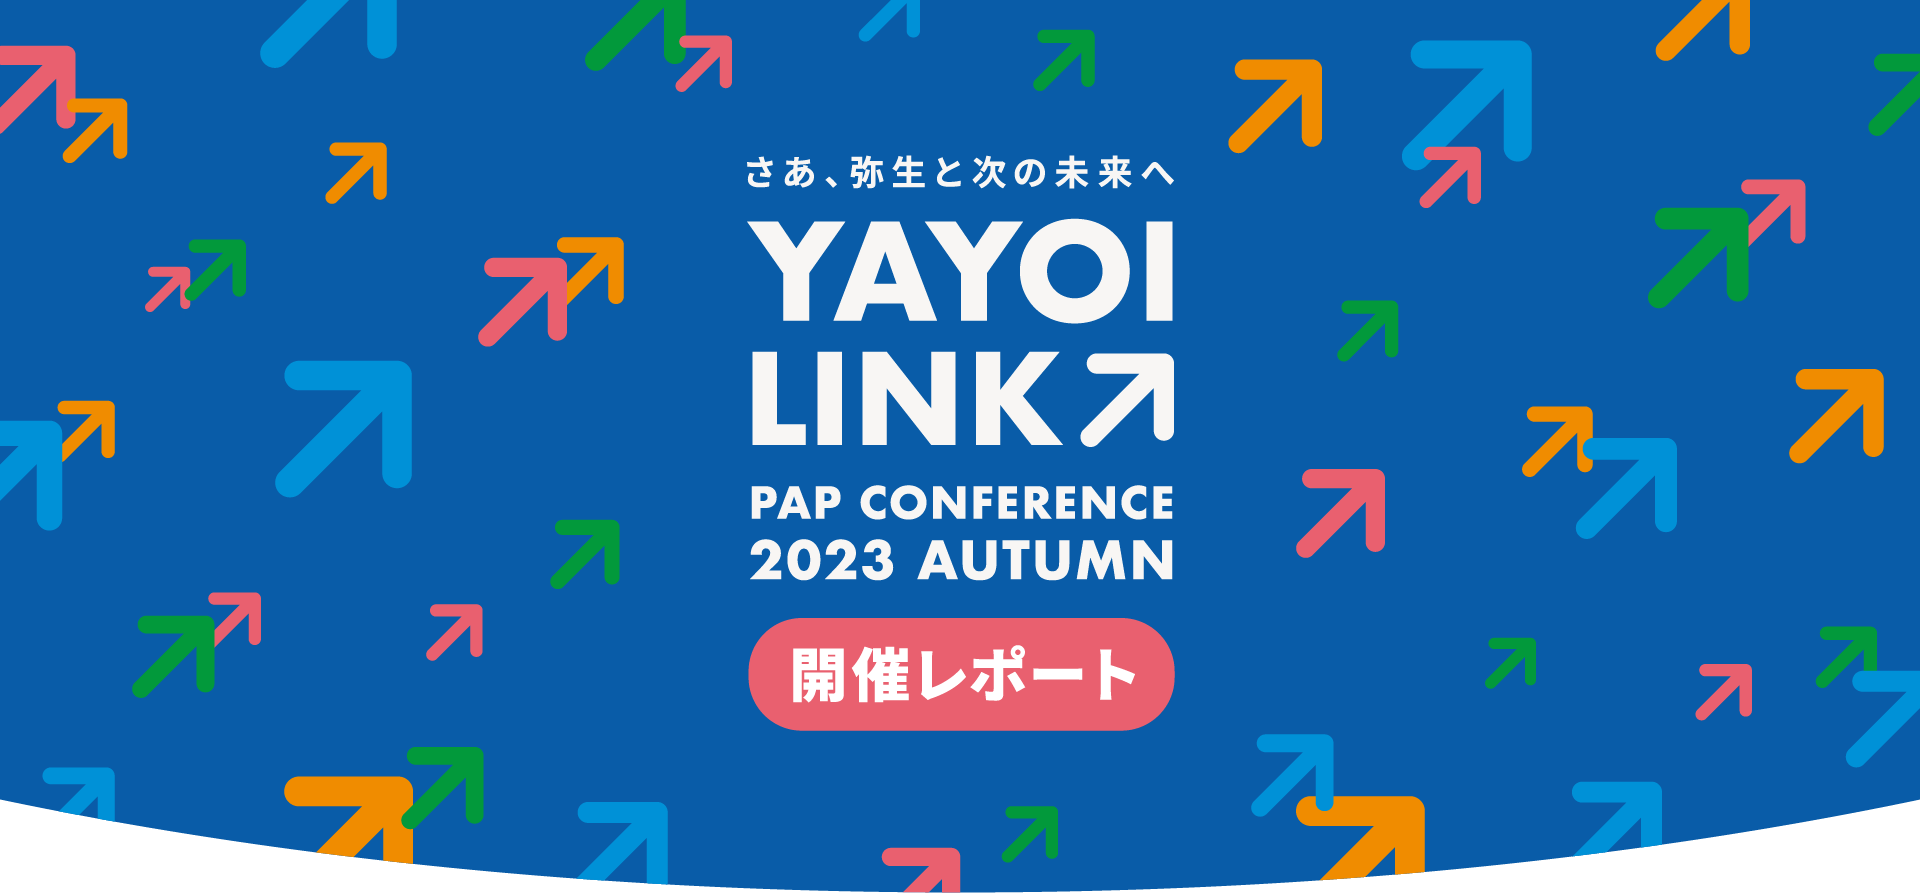 YAYOI LINK PAP CONFERENCE 2023 AUTUMN 開催レポート